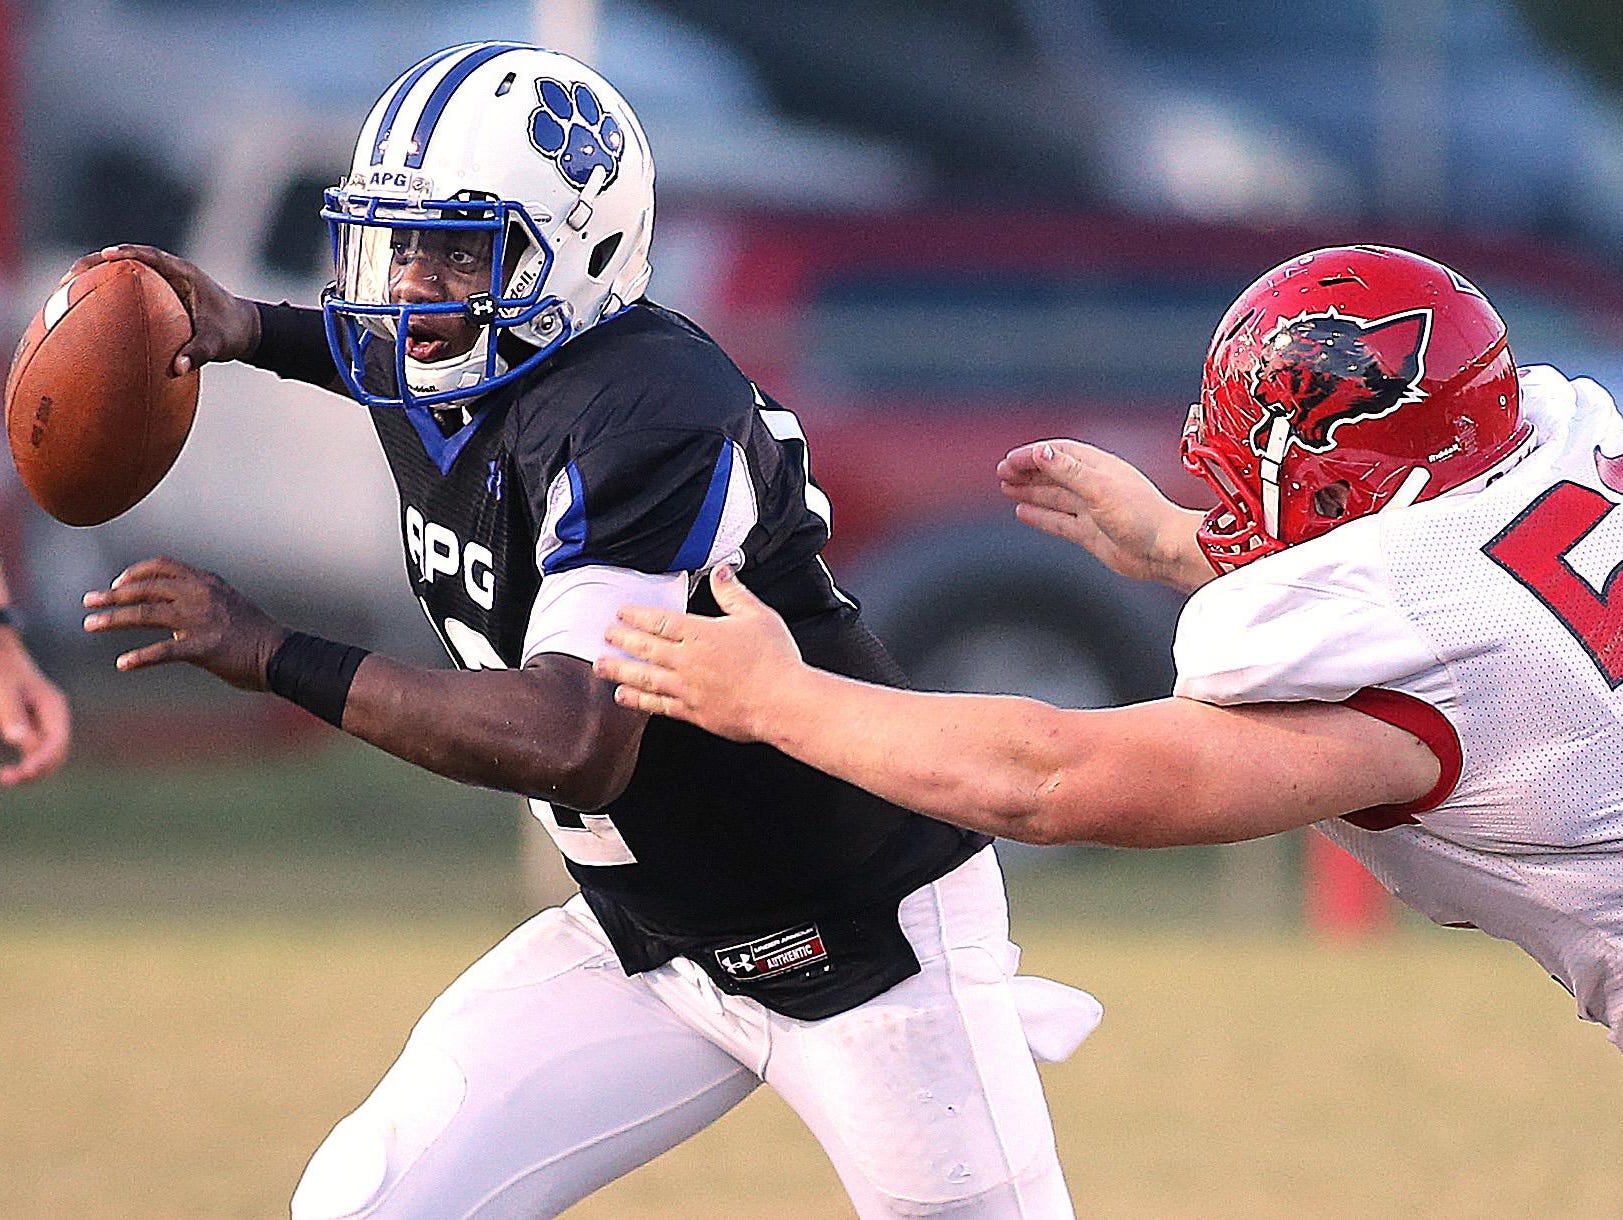 Former Godby quarterback J.T. Bradwell tries to escape the grasp of current Leon senior Gabe Beyer during a September 2013 game. The Cougars have won the last four meetings against Leon by an average score of 50-8.